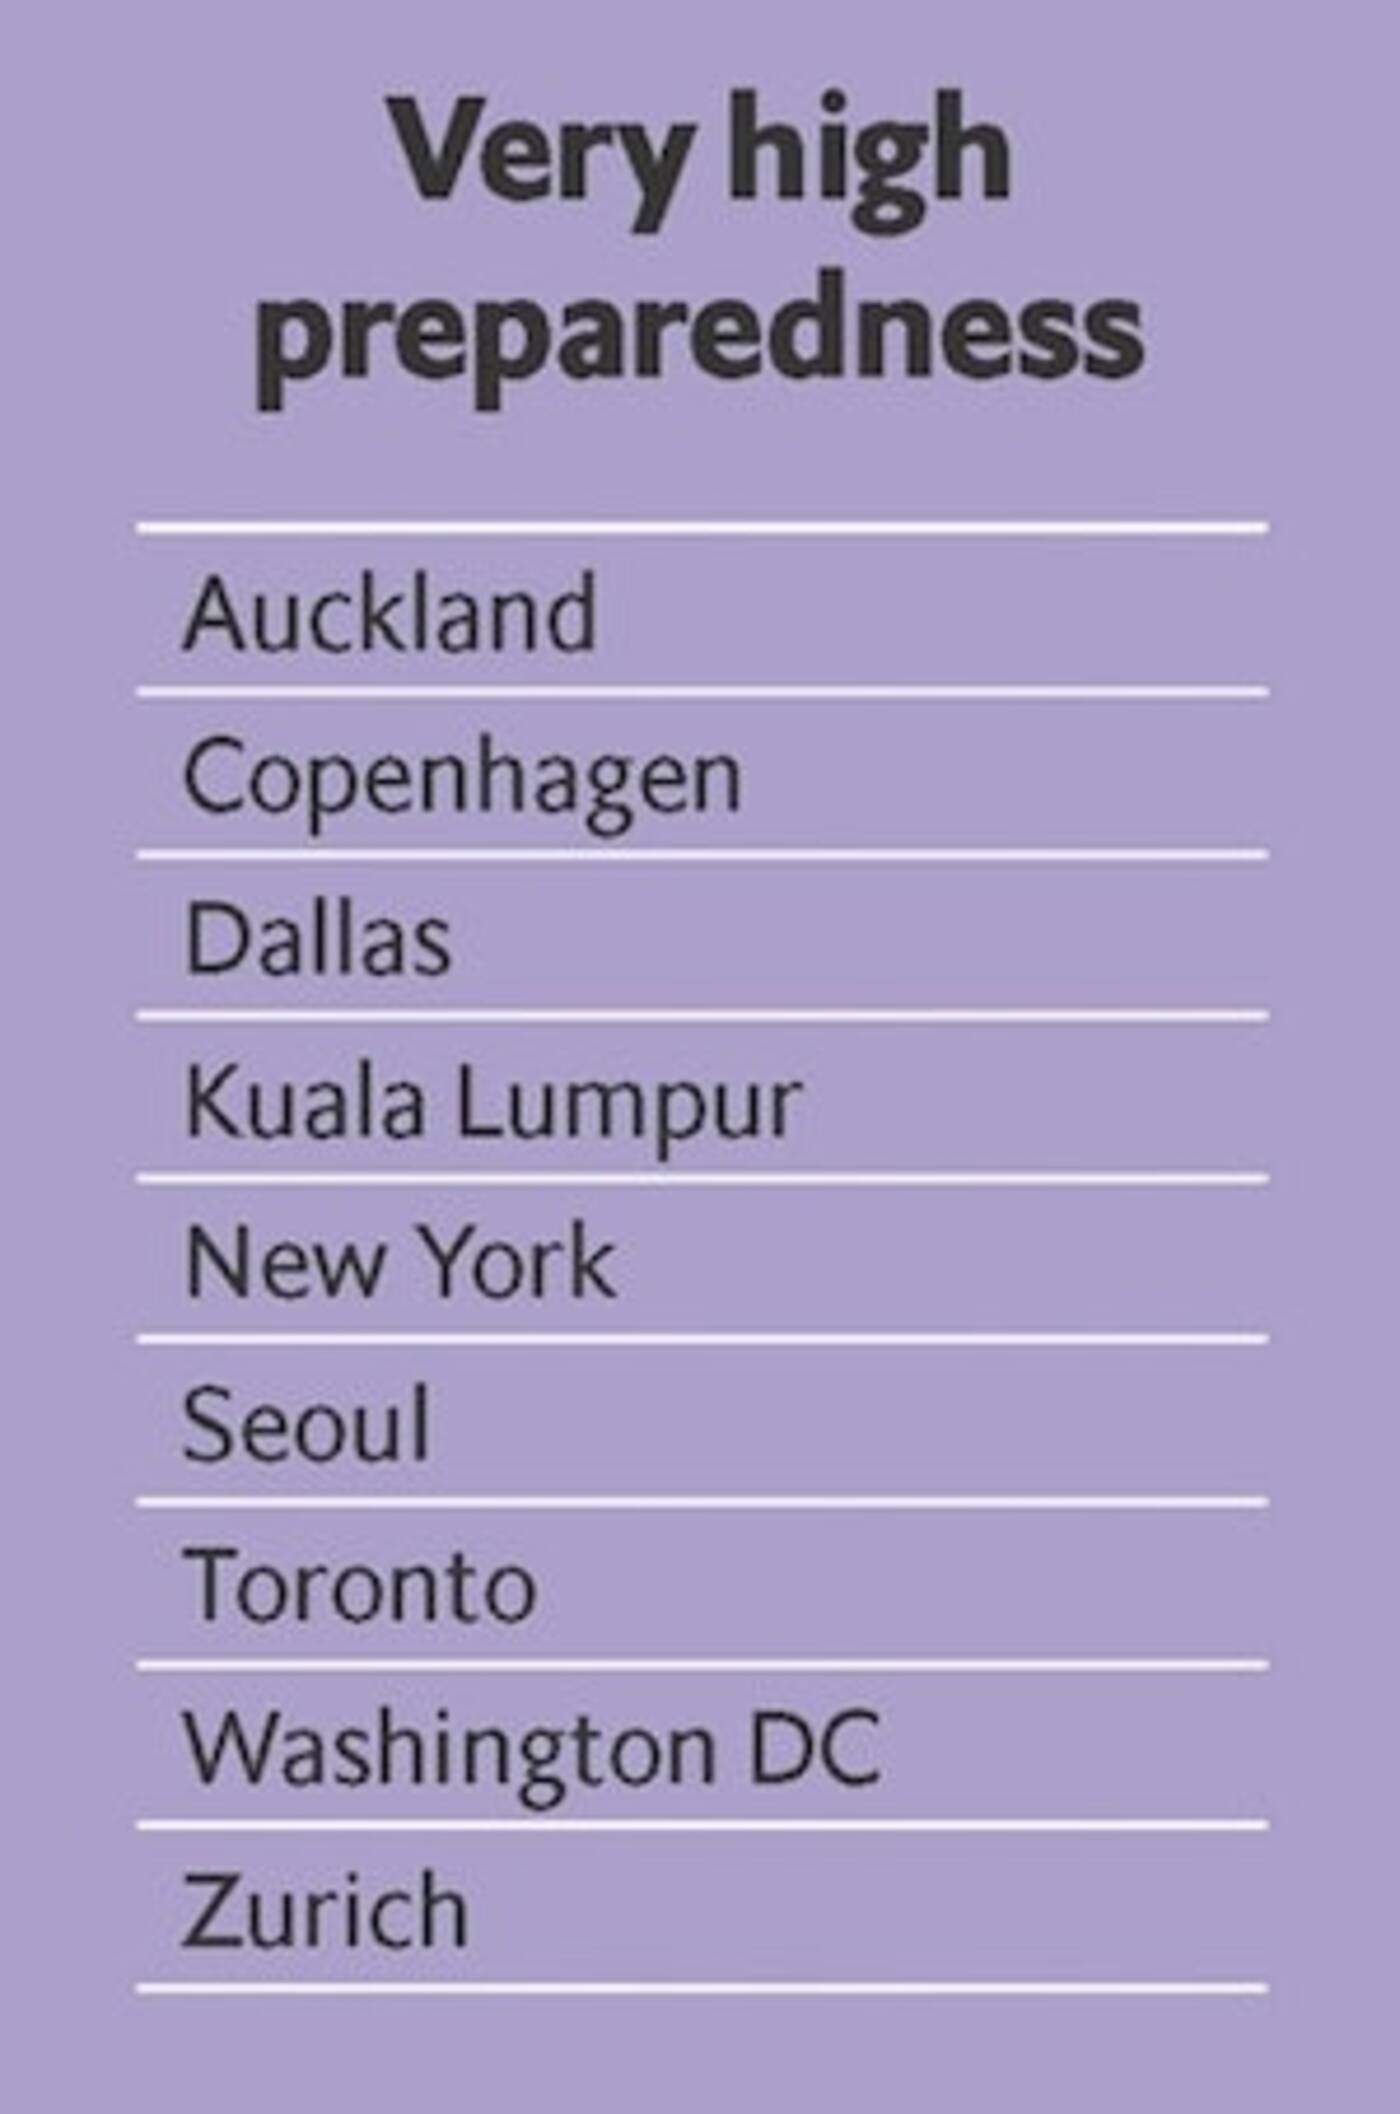 Toronto ranks in the "very high preparedness" category in response to cyber risk awareness